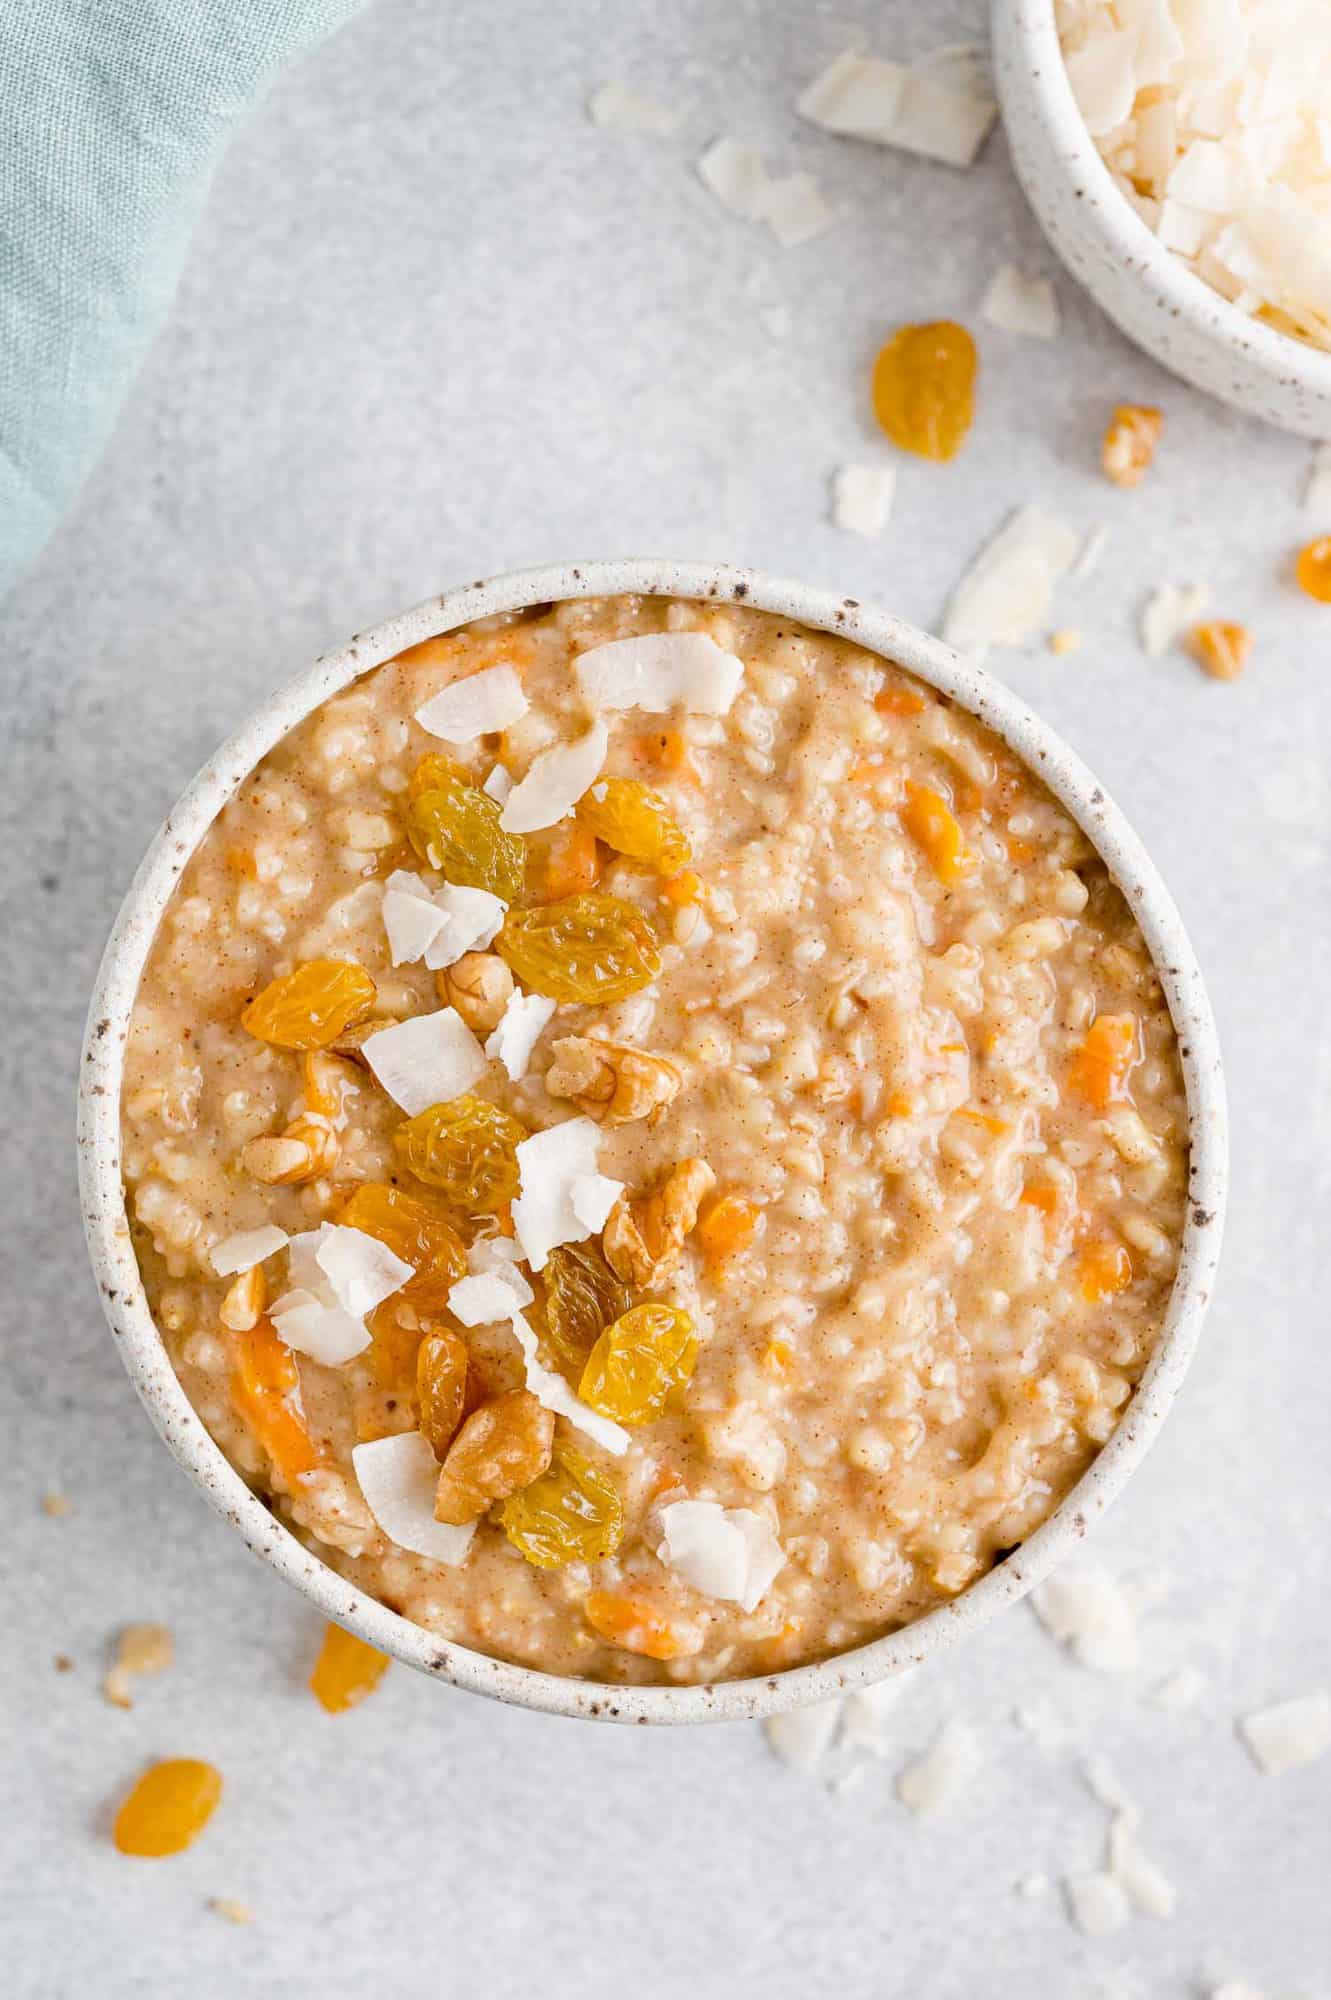 Carrot oatmeal with toppings including raisins, walnuts, coconut.